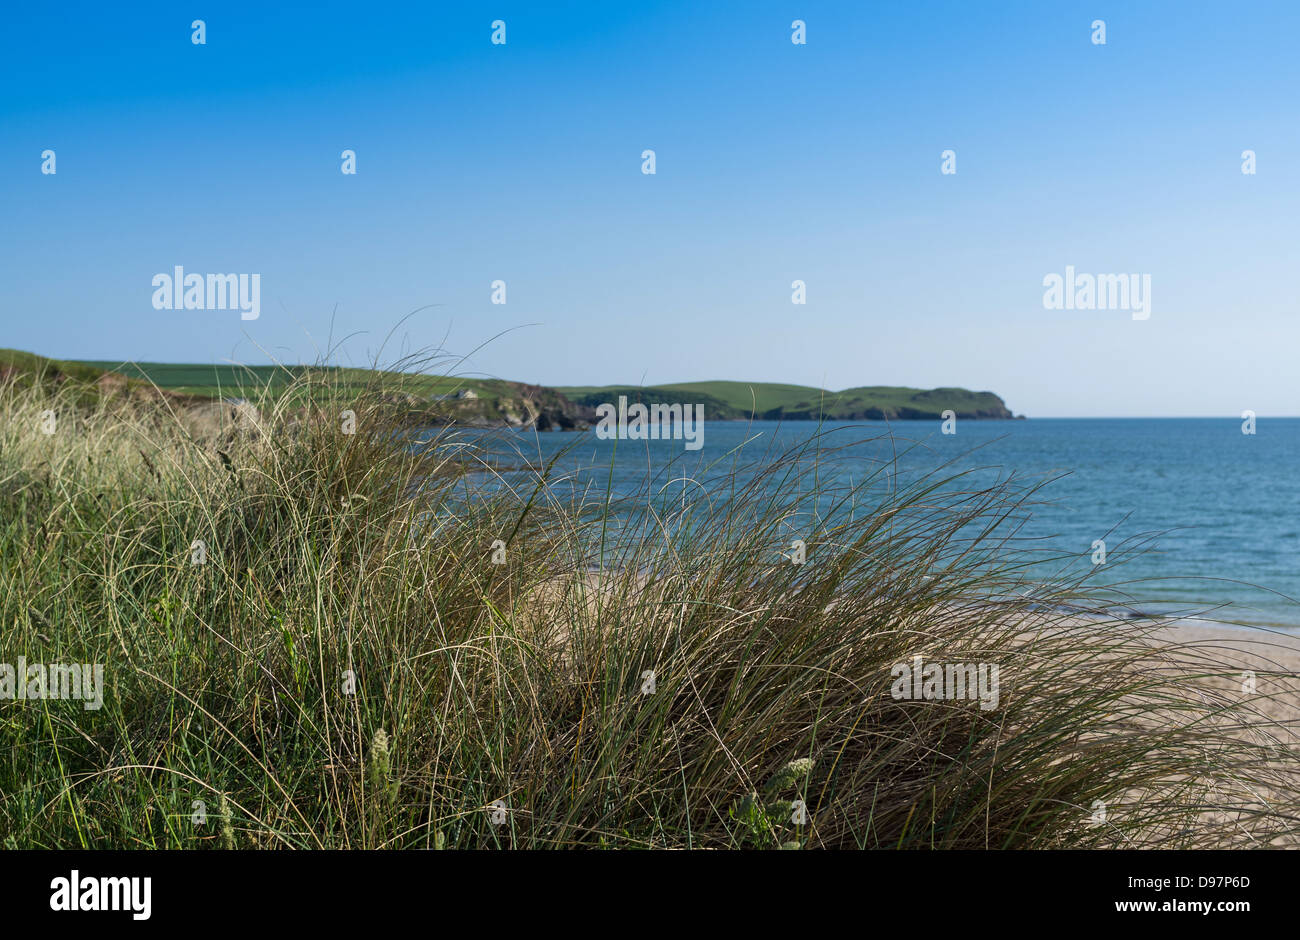 Thurlestone, Devon, UK. June 3rd 2013. View of the sea and cliffs at Thurlestone. Stock Photo